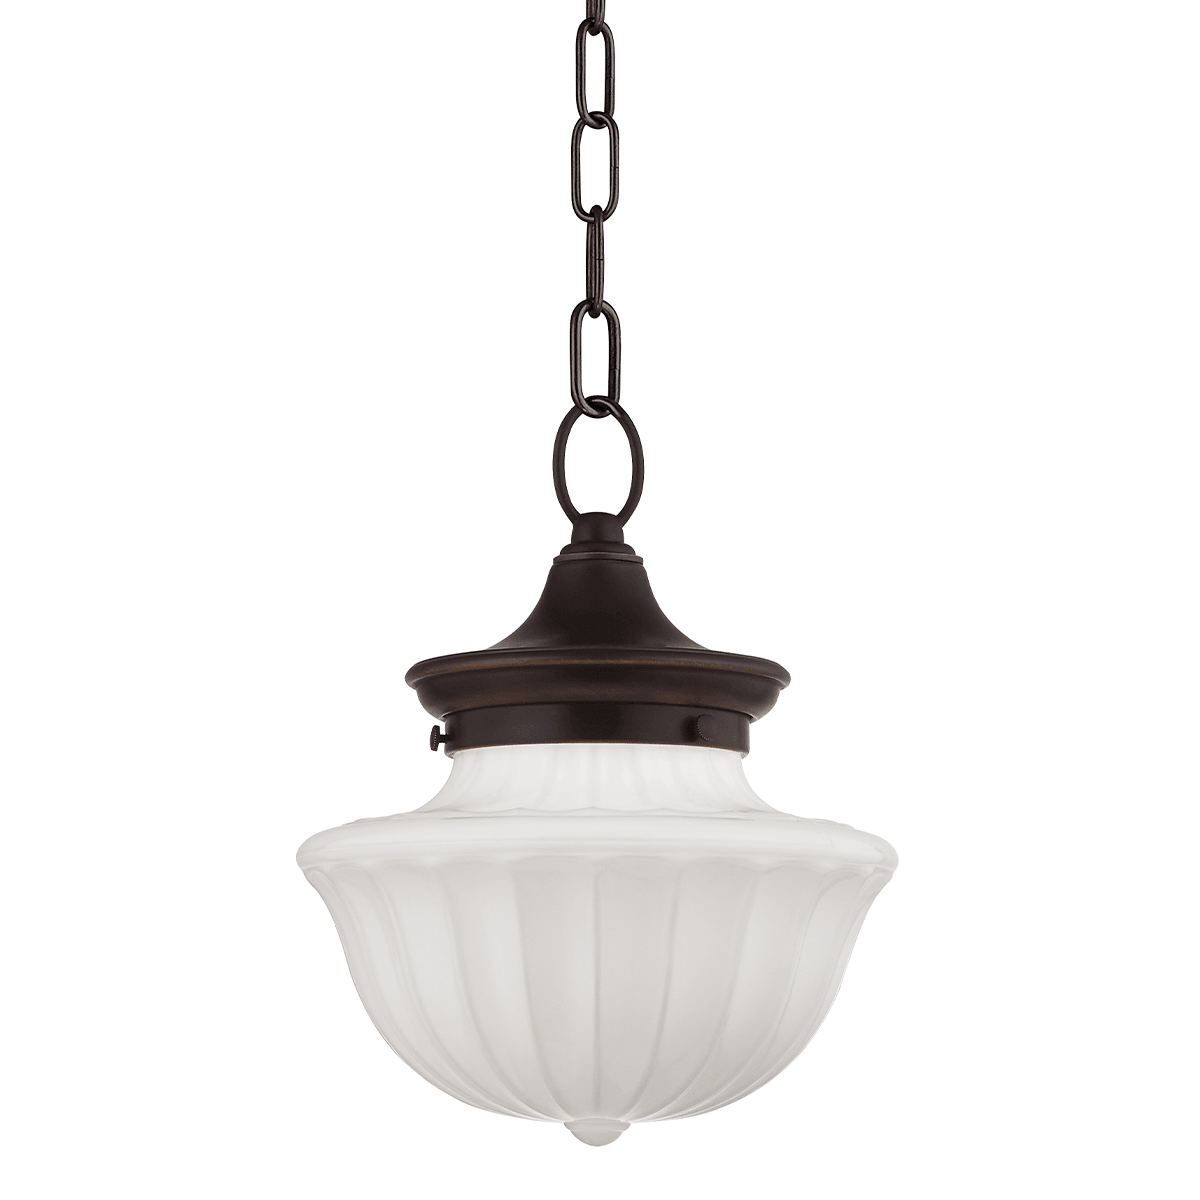 Steel with White Schoolhouse Glass Shade Pendant - LV LIGHTING